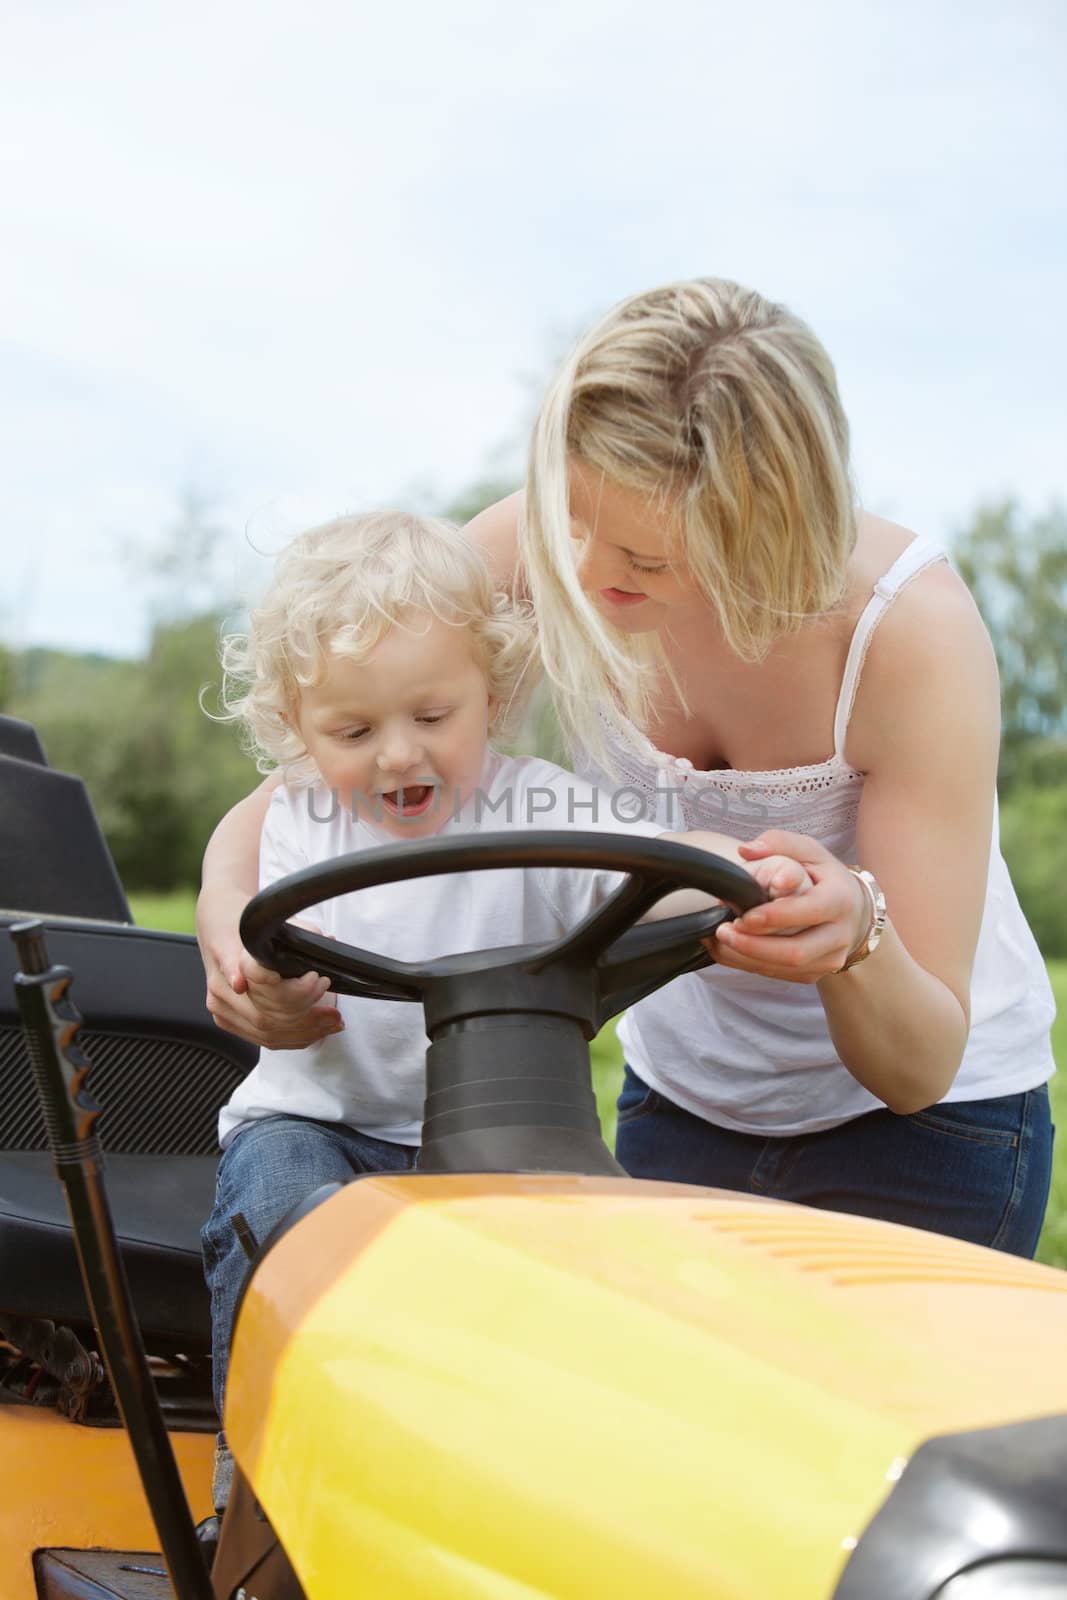 Young Boy with Mother on Garden Tractor by leaf